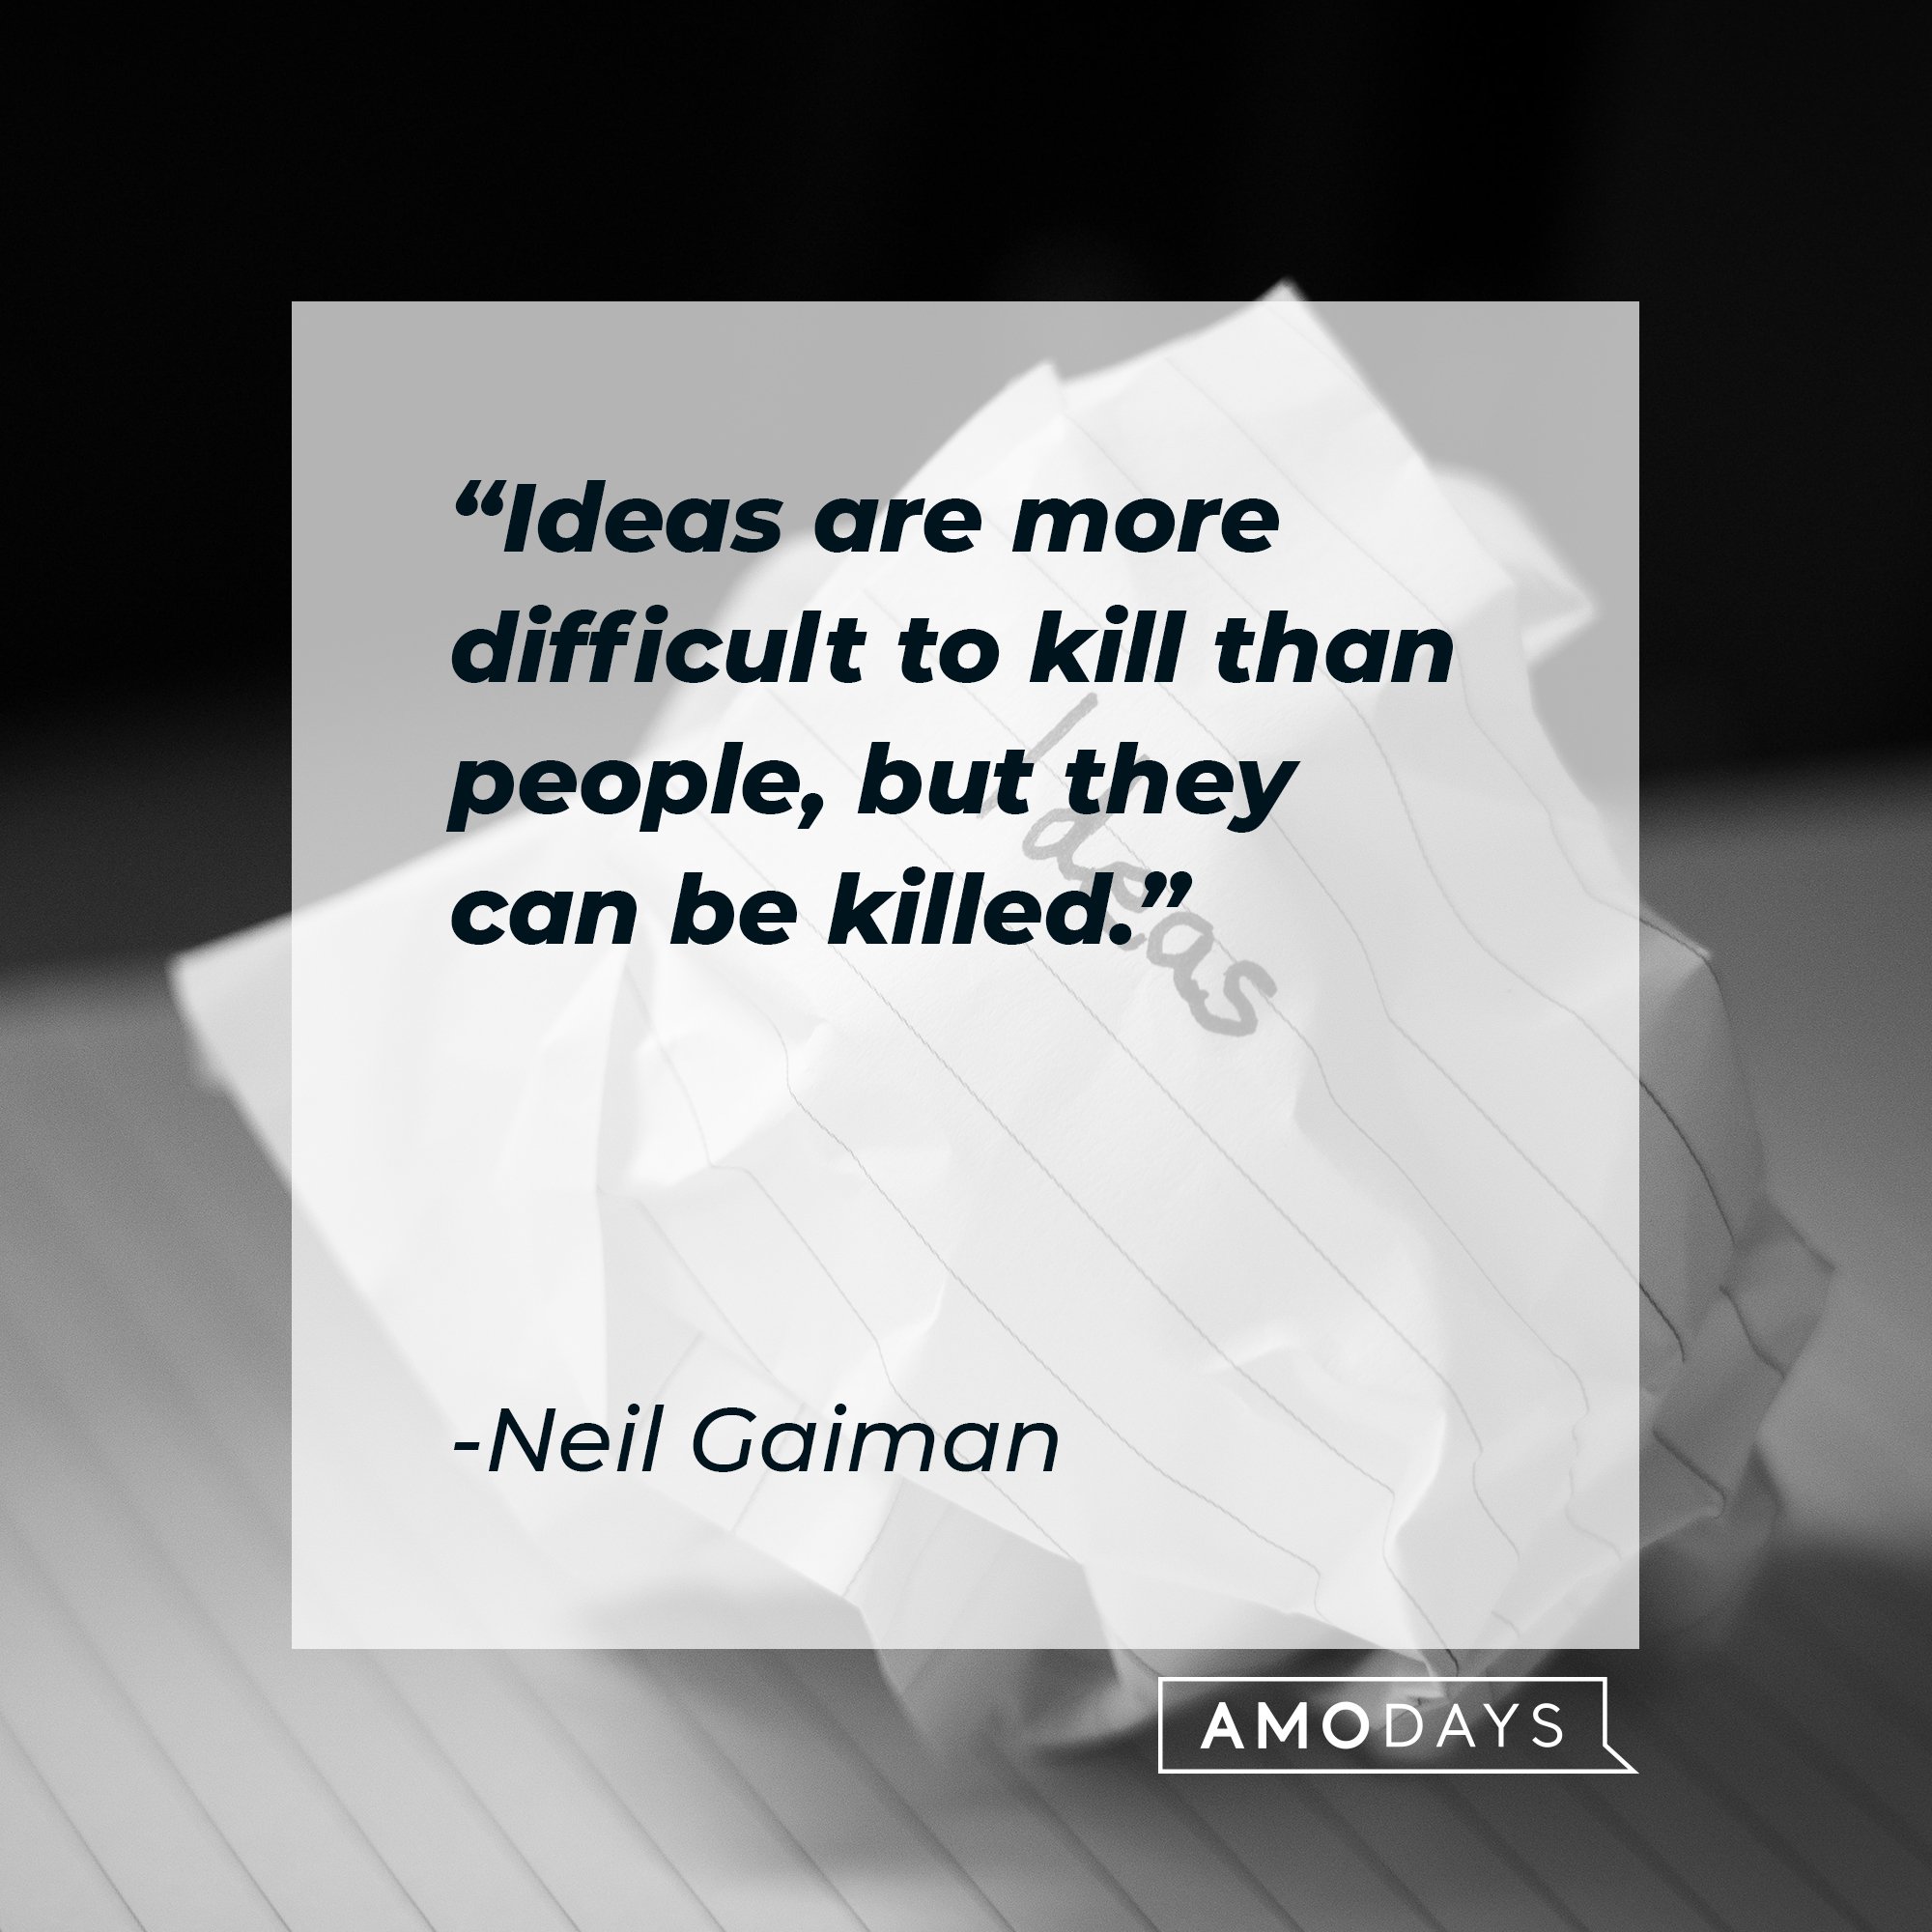 Neil Gaiman's quote: "Ideas are more difficult to kill than people, but they can be killed." | Image: AmoDays